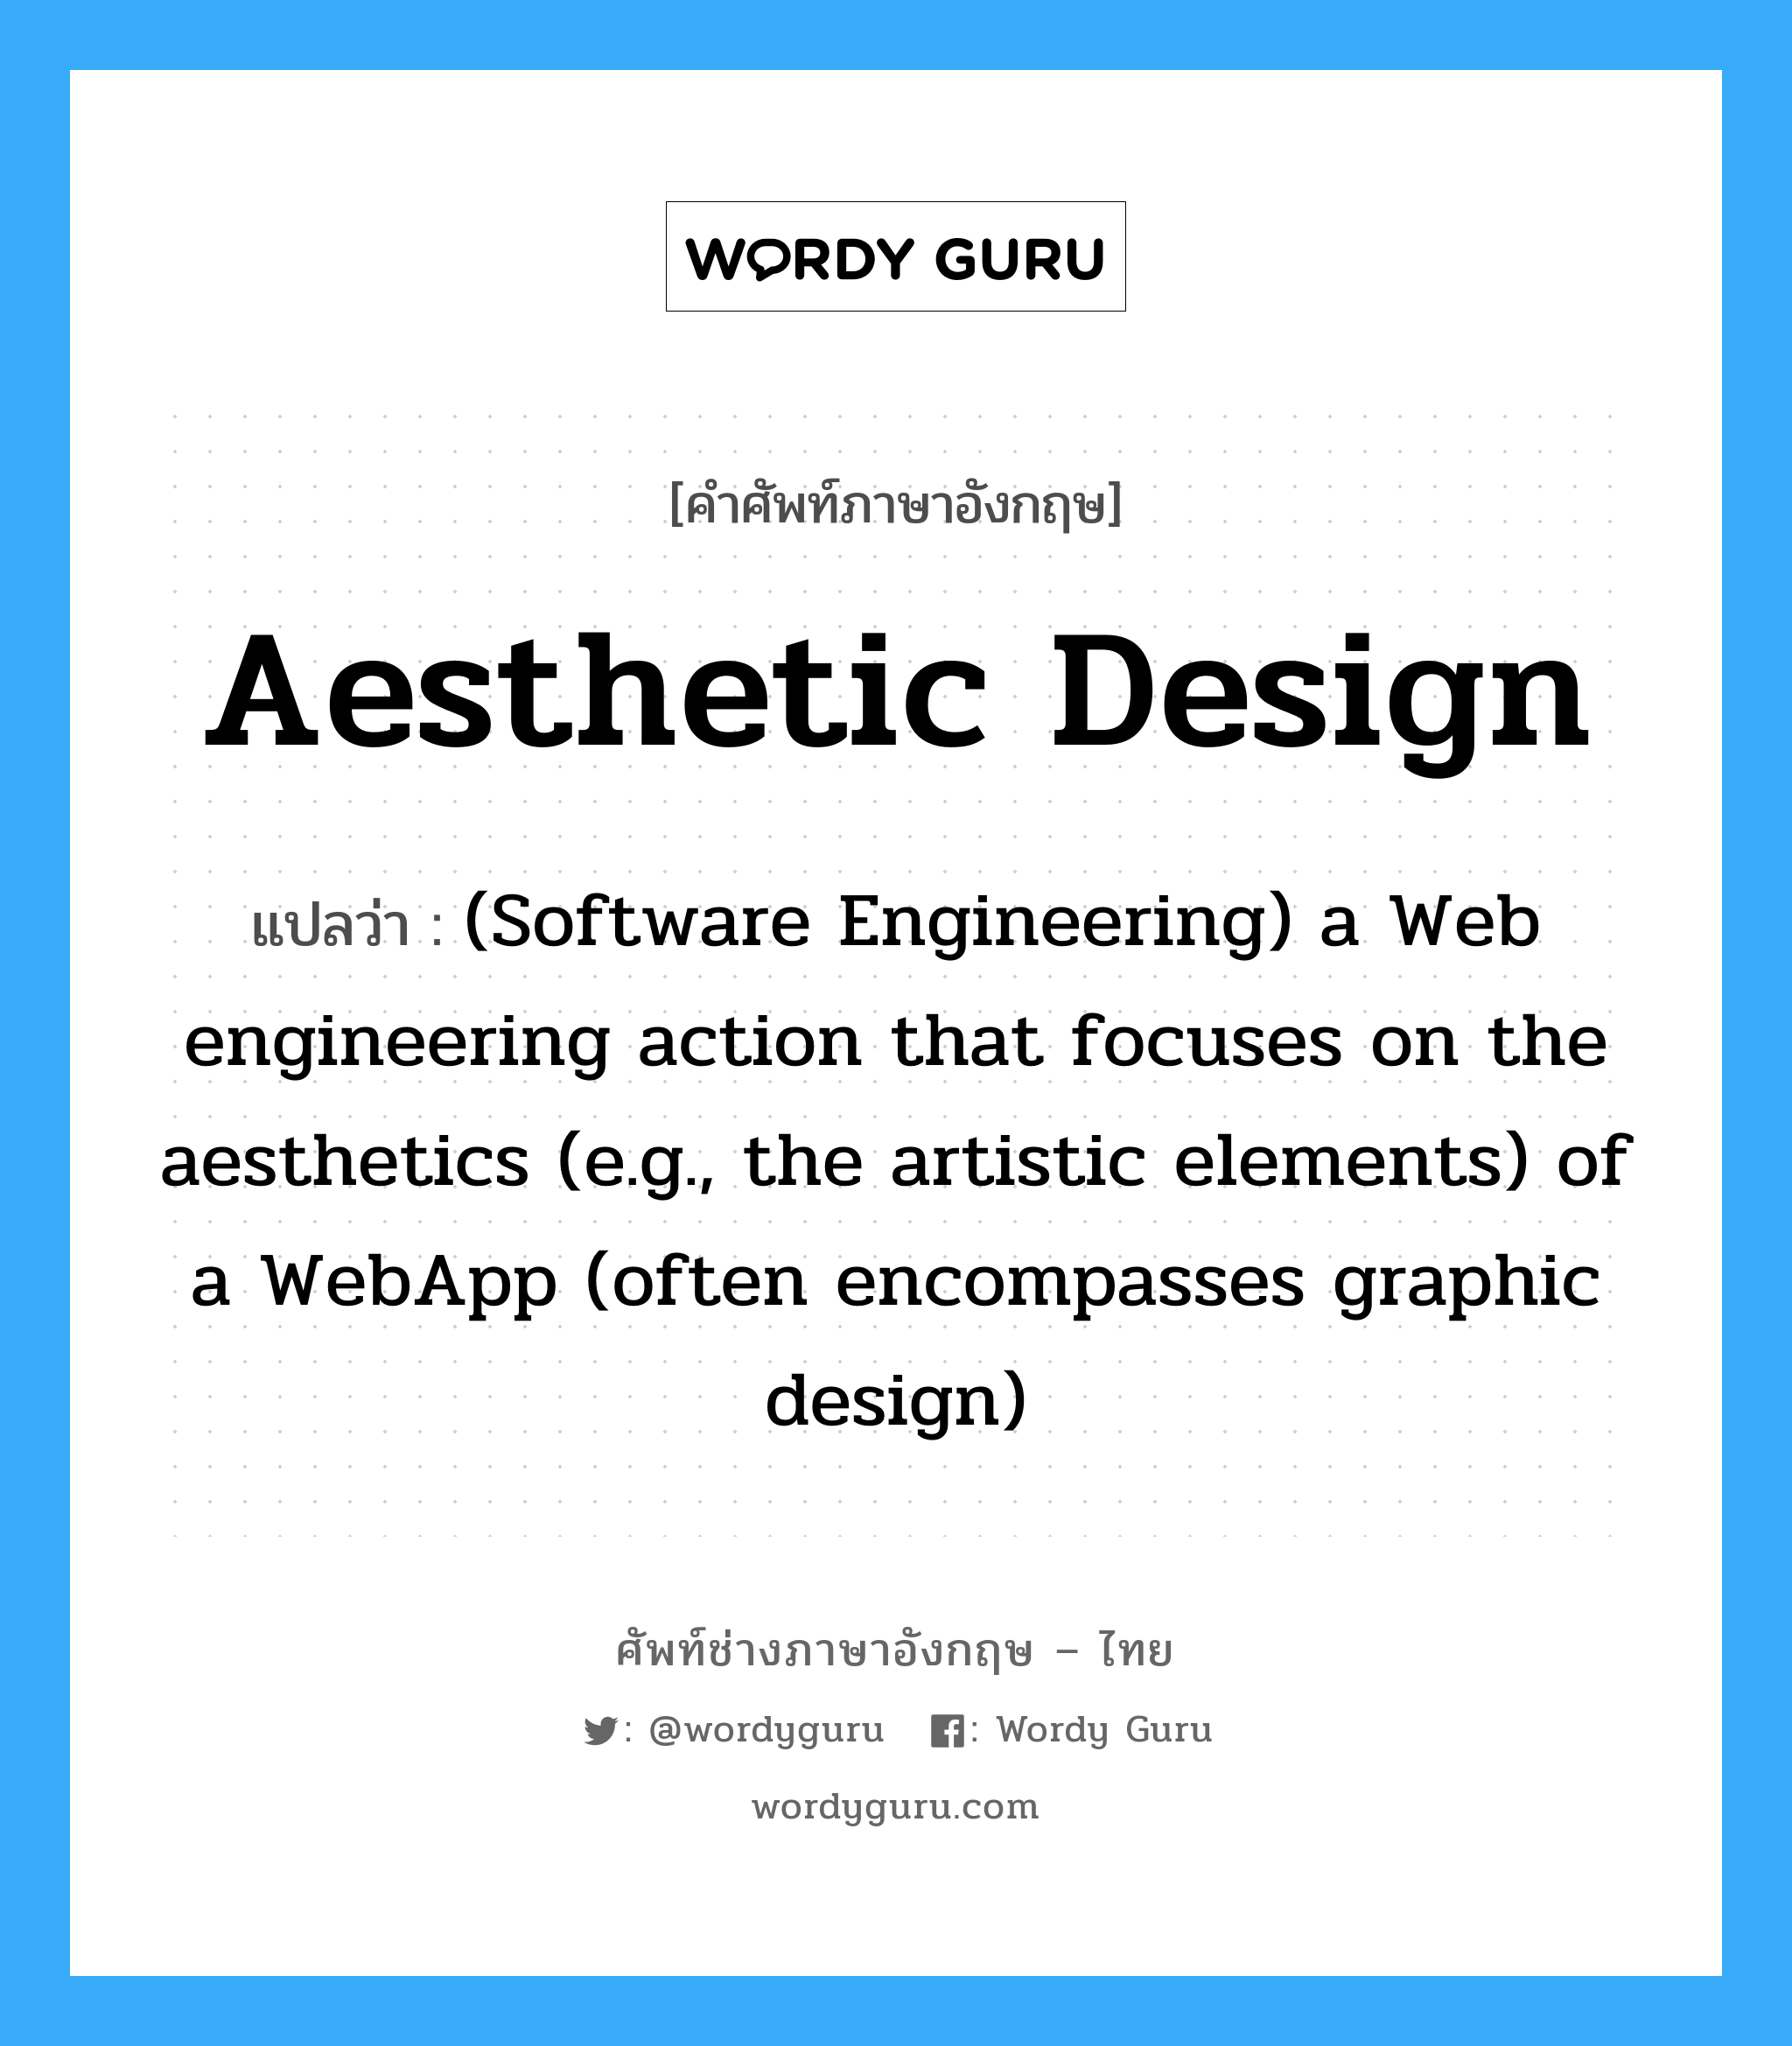 (Software Engineering) a Web engineering action that focuses on the aesthetics (e.g., the artistic elements) of a WebApp (often encompasses graphic design) ภาษาอังกฤษ?, คำศัพท์ช่างภาษาอังกฤษ - ไทย (Software Engineering) a Web engineering action that focuses on the aesthetics (e.g., the artistic elements) of a WebApp (often encompasses graphic design) คำศัพท์ภาษาอังกฤษ (Software Engineering) a Web engineering action that focuses on the aesthetics (e.g., the artistic elements) of a WebApp (often encompasses graphic design) แปลว่า Aesthetic design